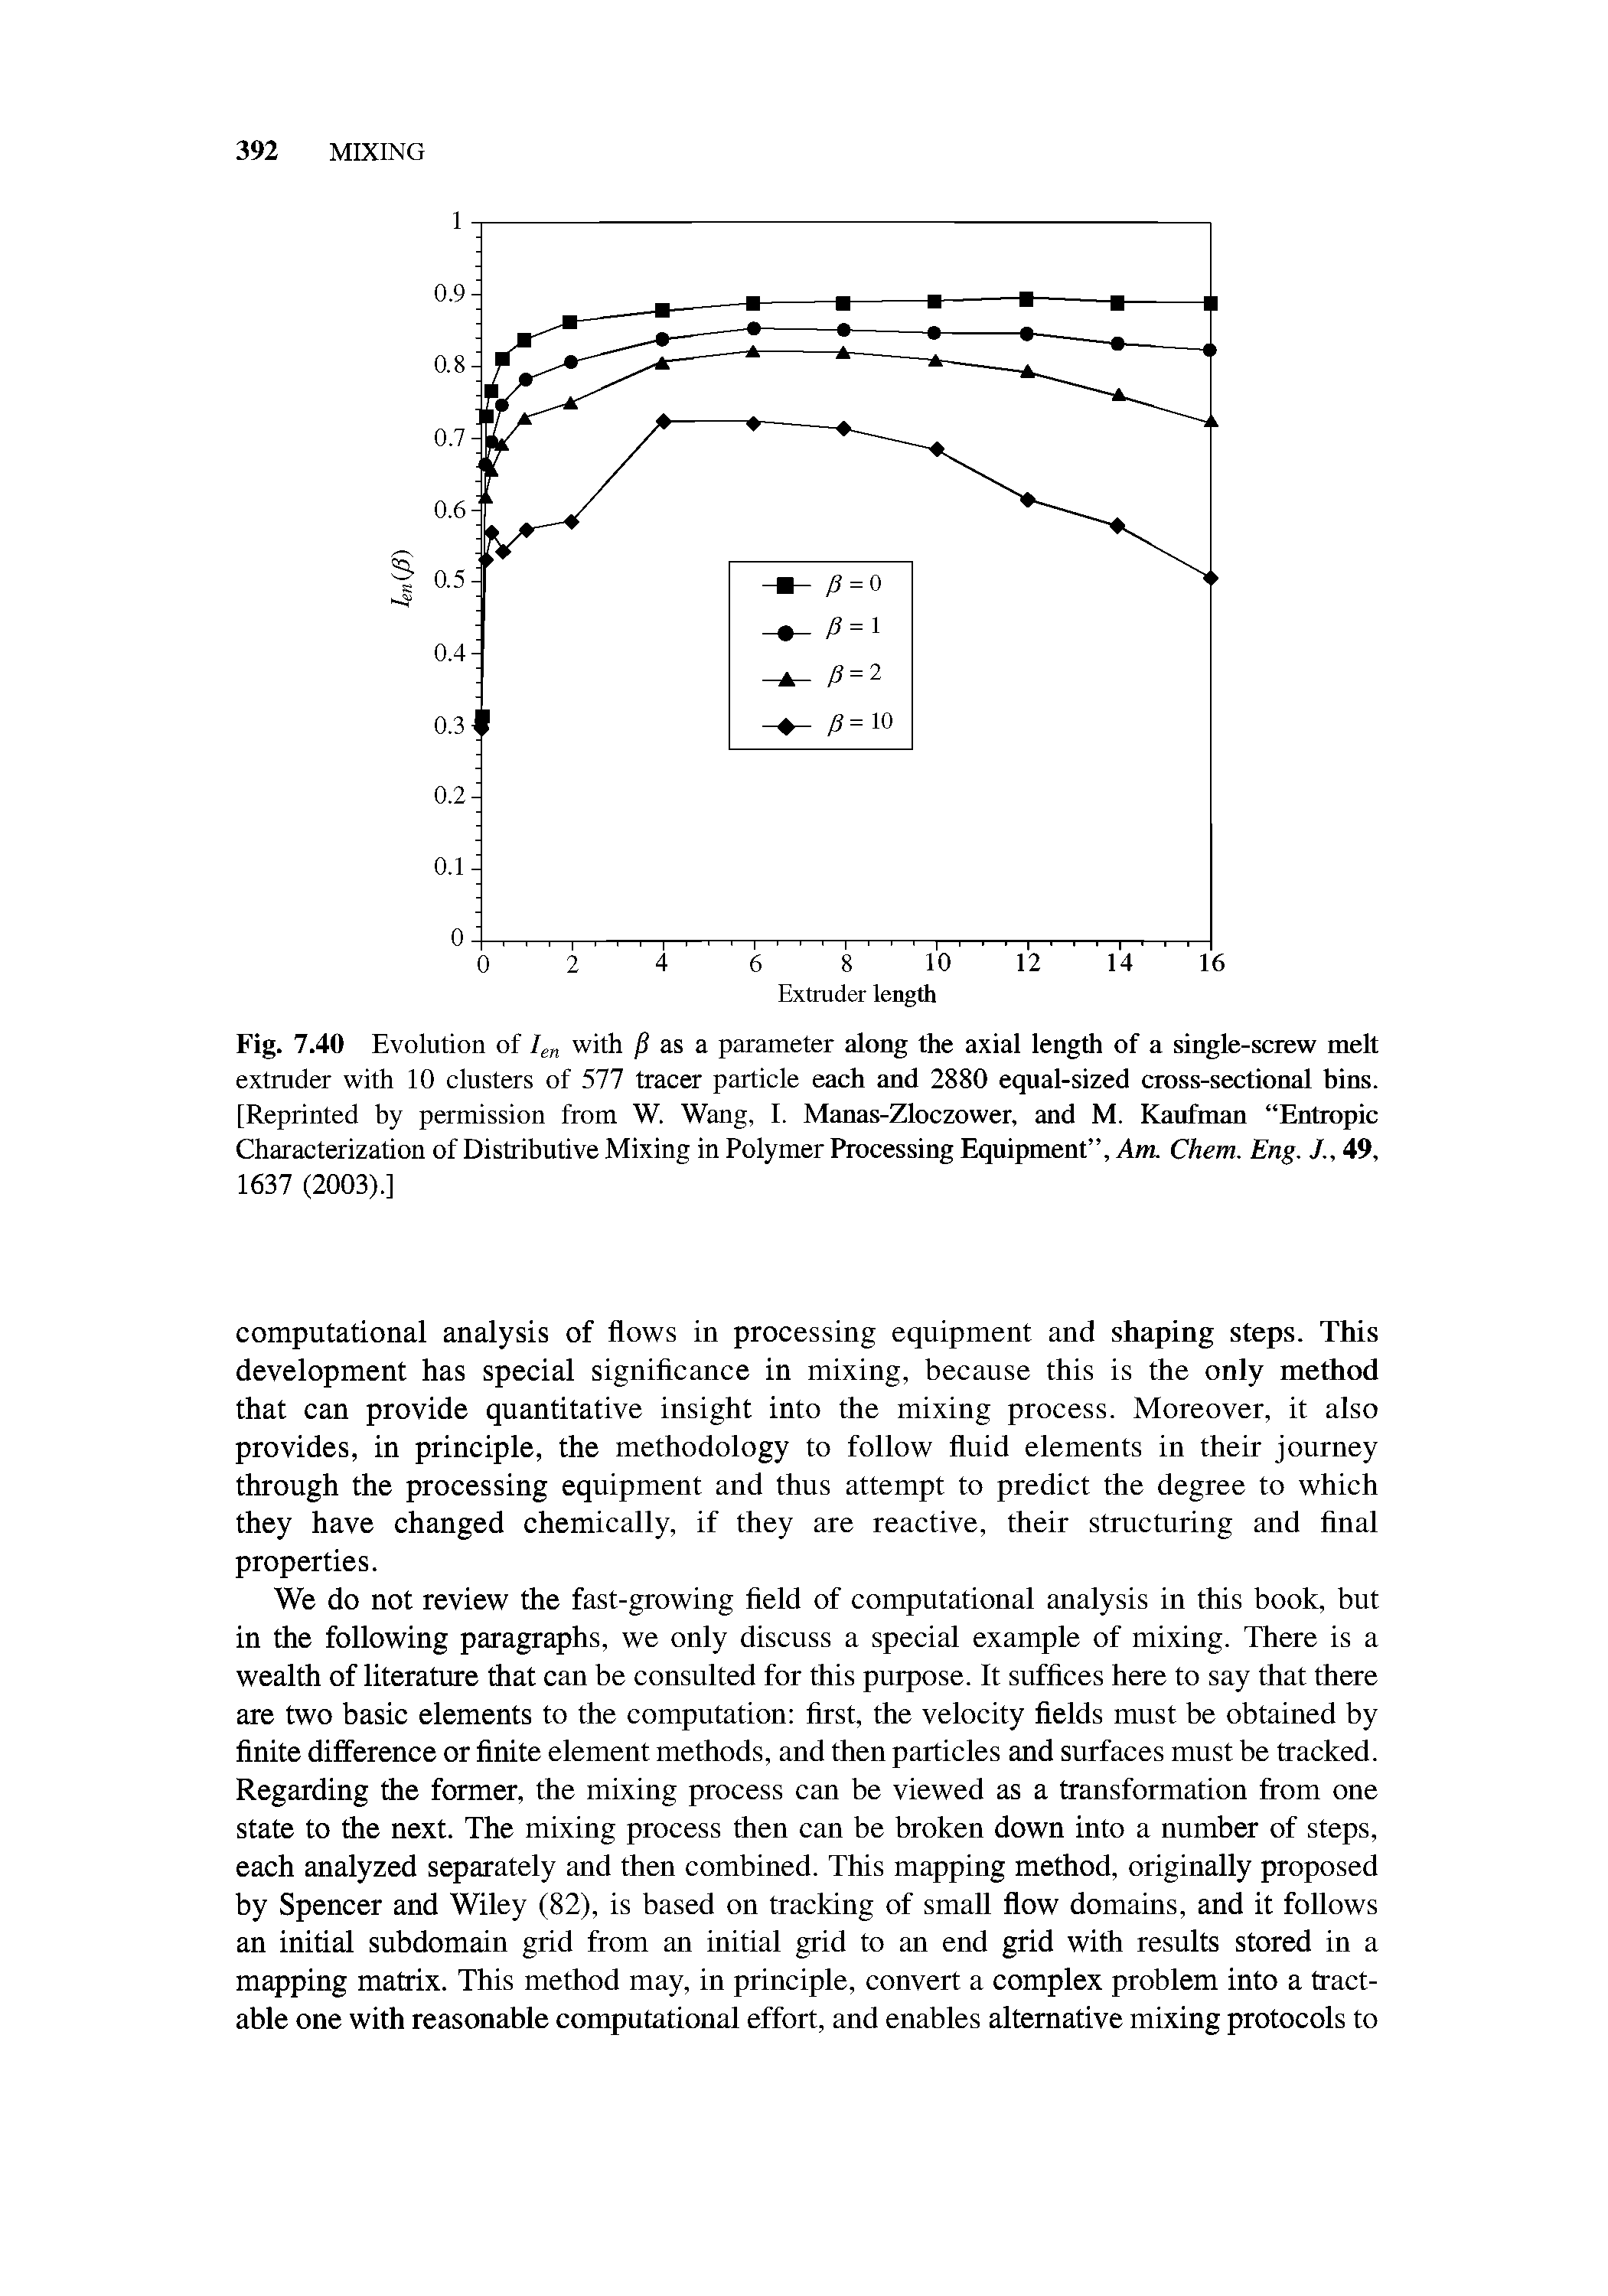 Fig. 7.40 Evolution of Ien with / as a parameter along the axial length of a single-screw melt extruder with 10 clusters of 577 tracer particle each and 2880 equal-sized cross-sectional bins. [Reprinted by permission from W. Wang, I. Manas-Zloczower, and M. Kaufman Entropic Characterization of Distributive Mixing in Polymer Processing Equipment , Am. Chem. Eng. J., 49, 1637 (2003).]...